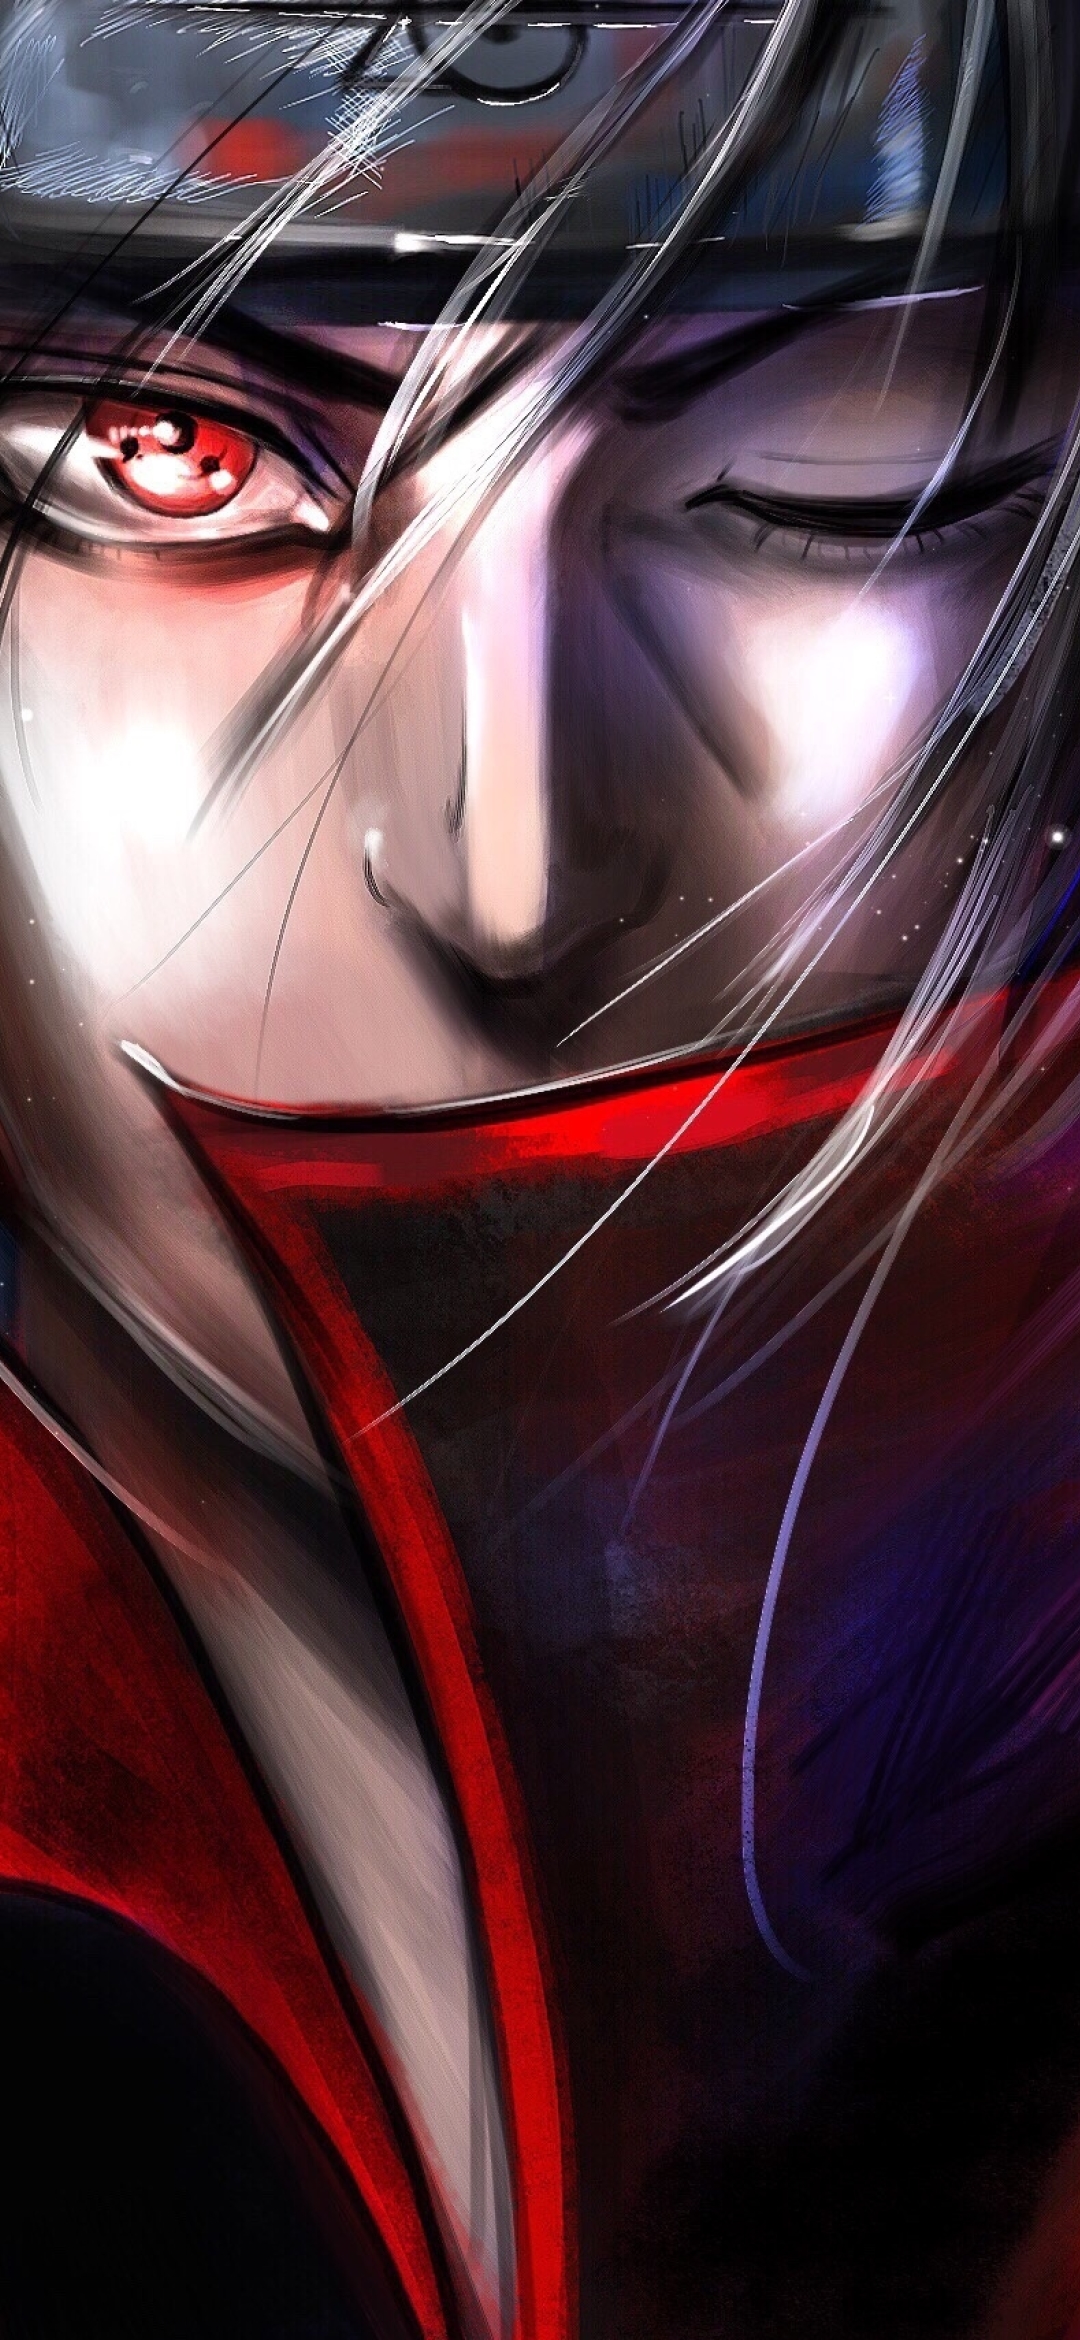 Featured image of post Sharingan Wallpaper Hd Iphone New sharingan wallpapers for iphone click view full size or download at above button and the images will be yours